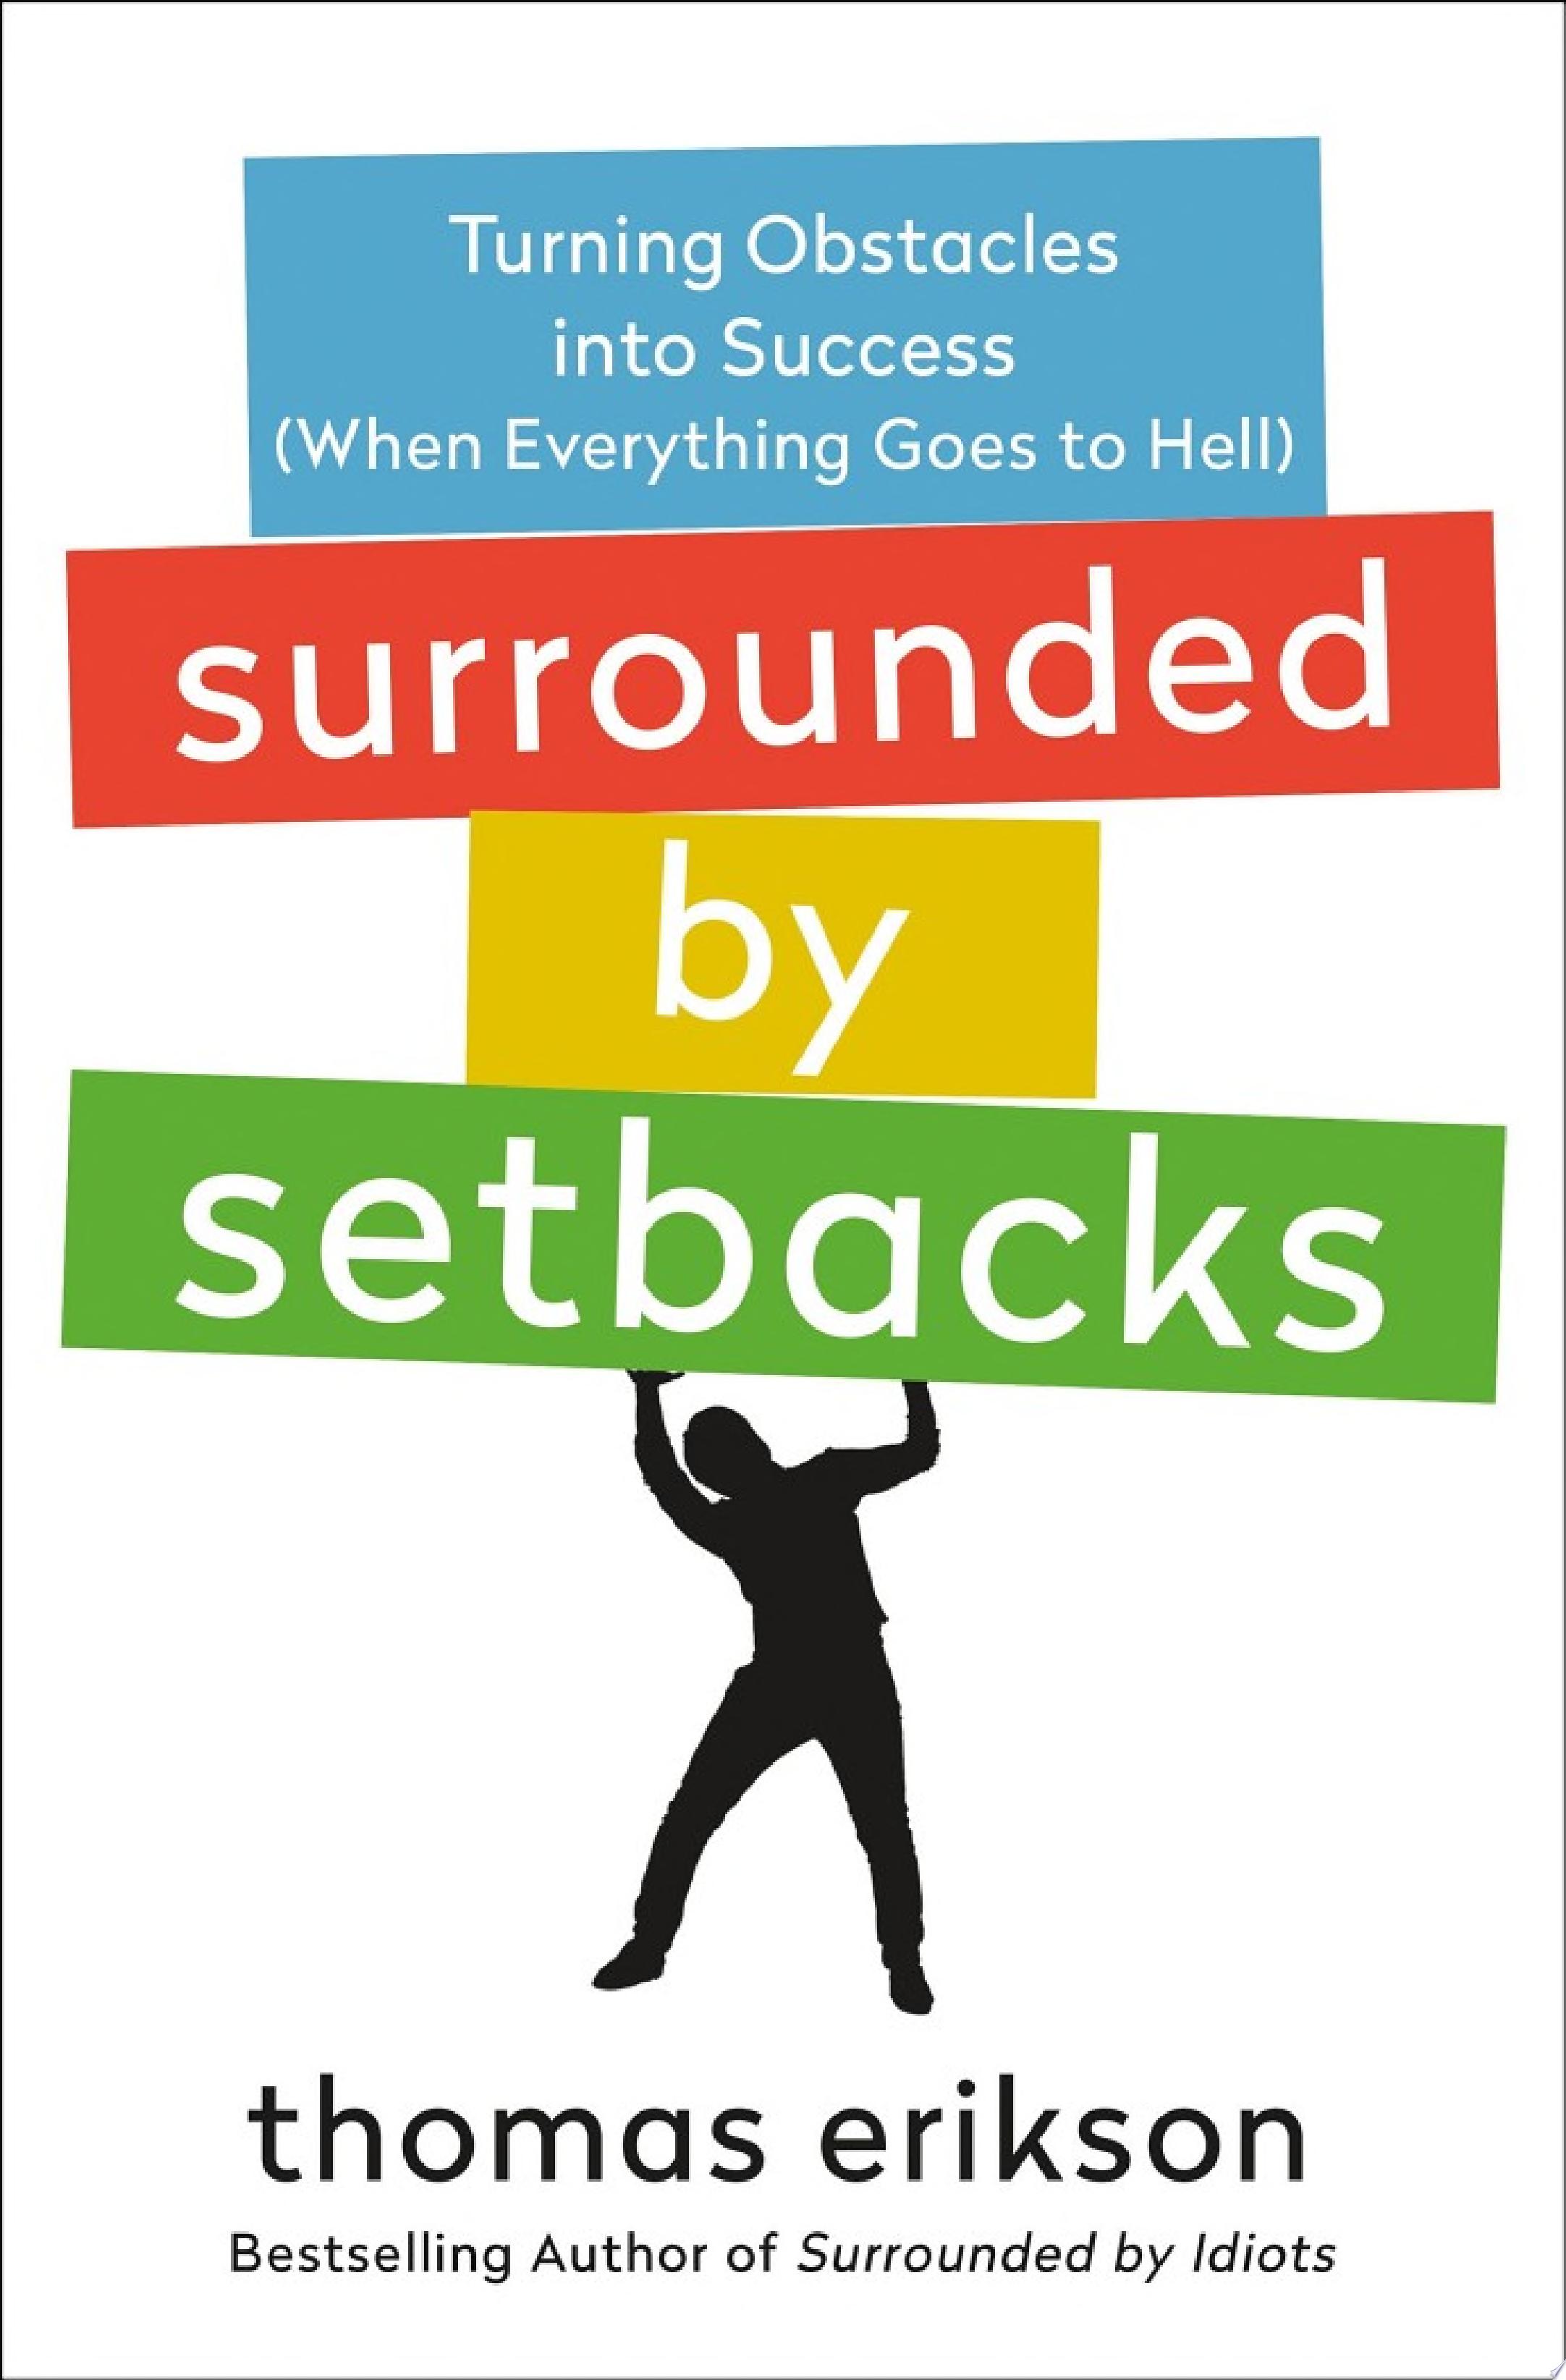 Image for "Surrounded by Setbacks"